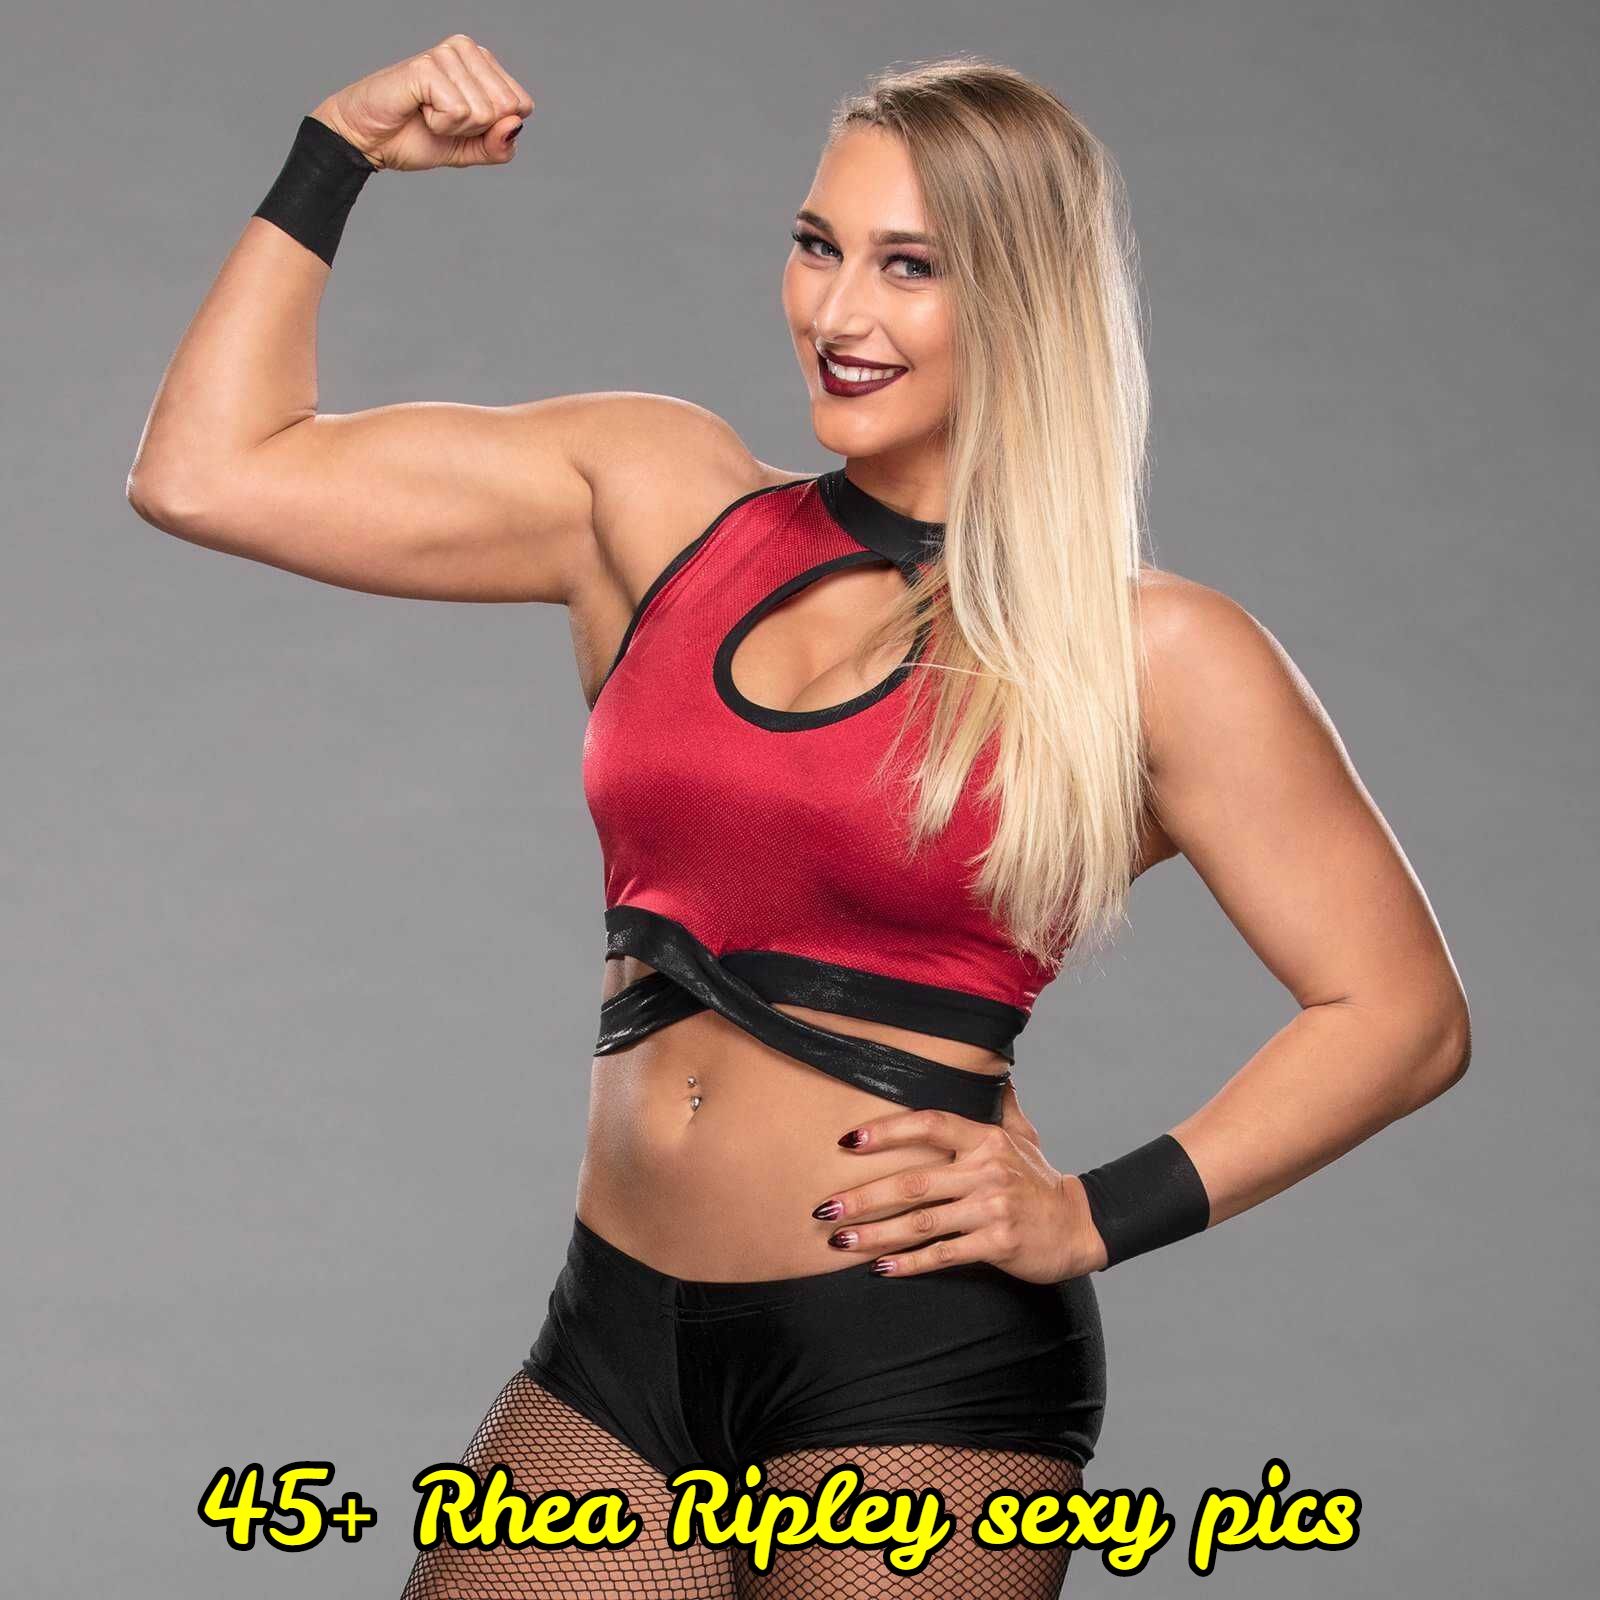 Rhea Ripley Picture Can Make You Fall For Her